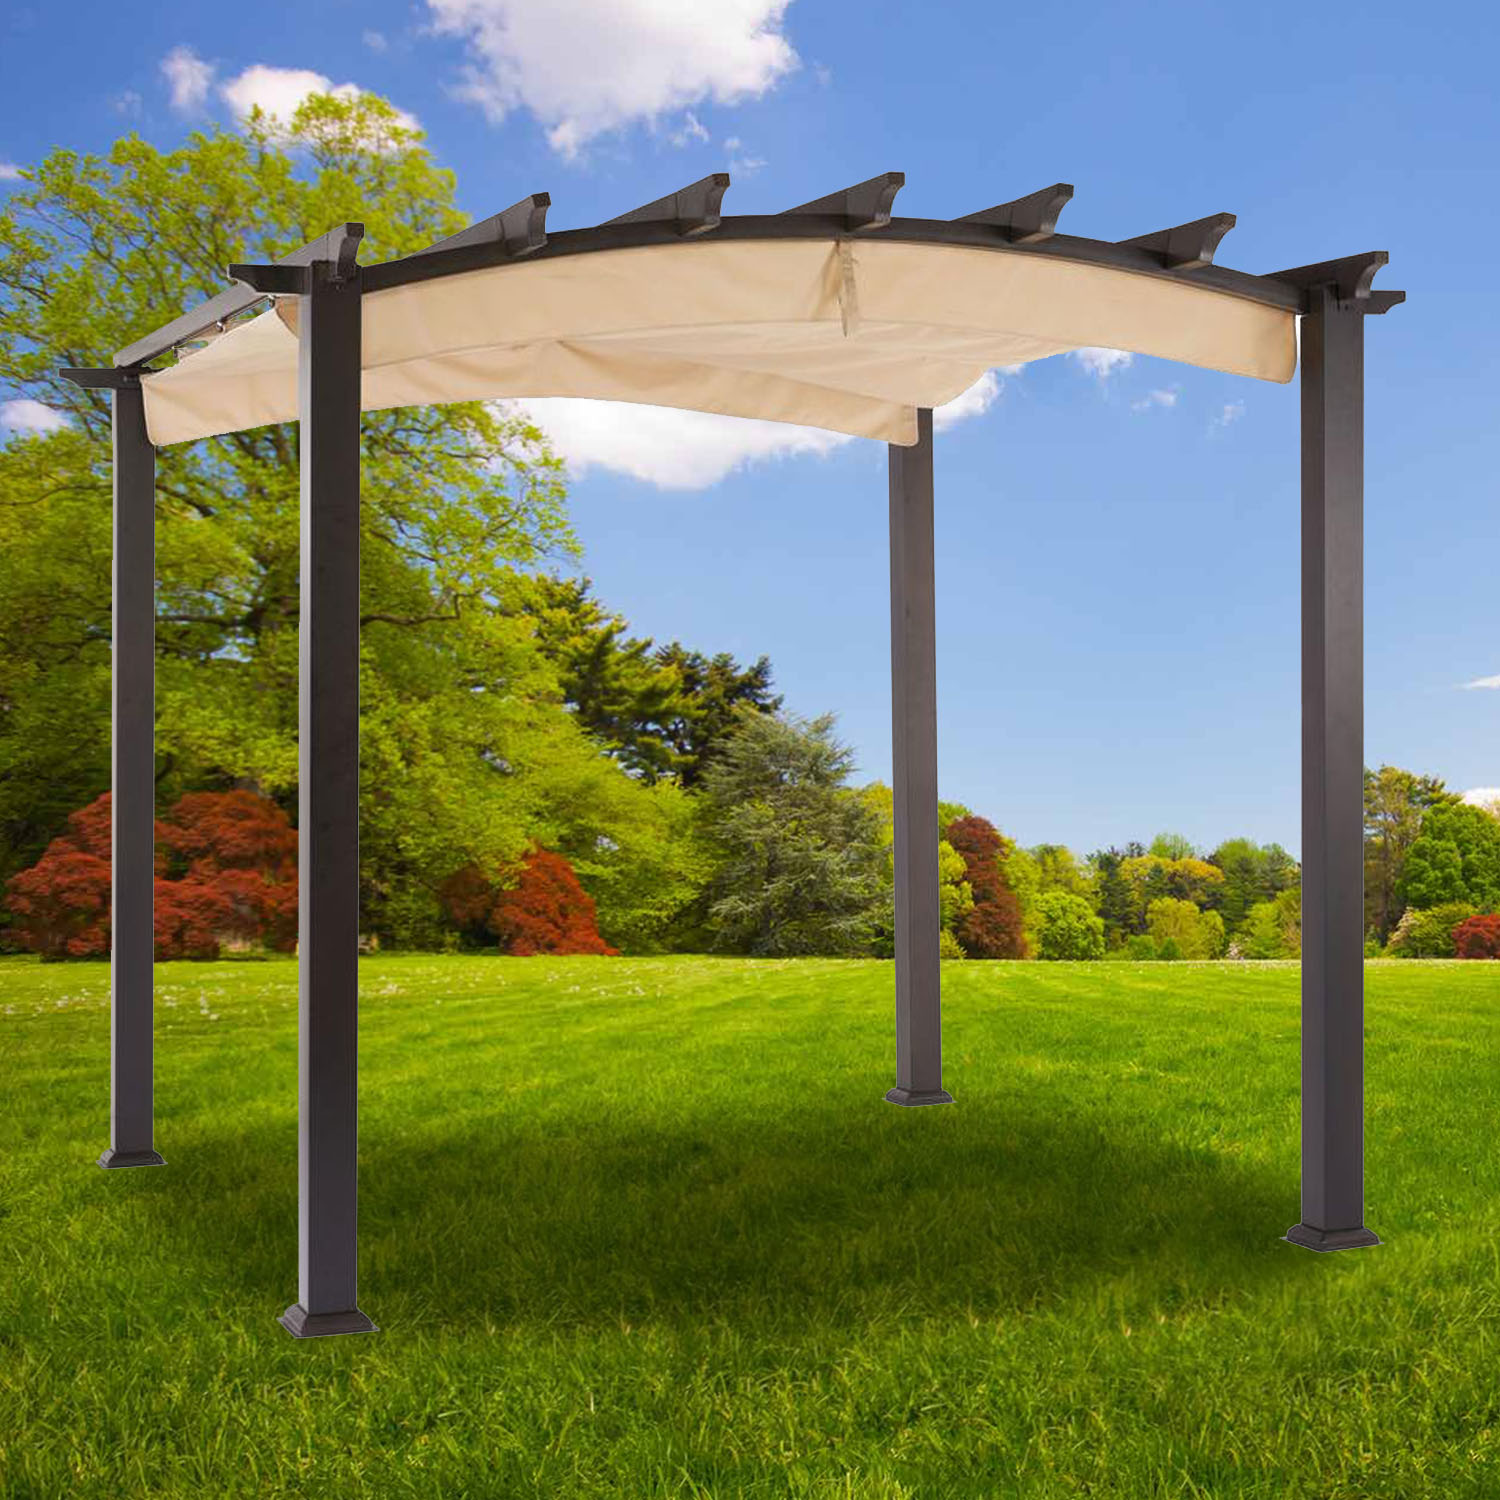 Replacement Canopy for Arched Pergola - RipLock 350